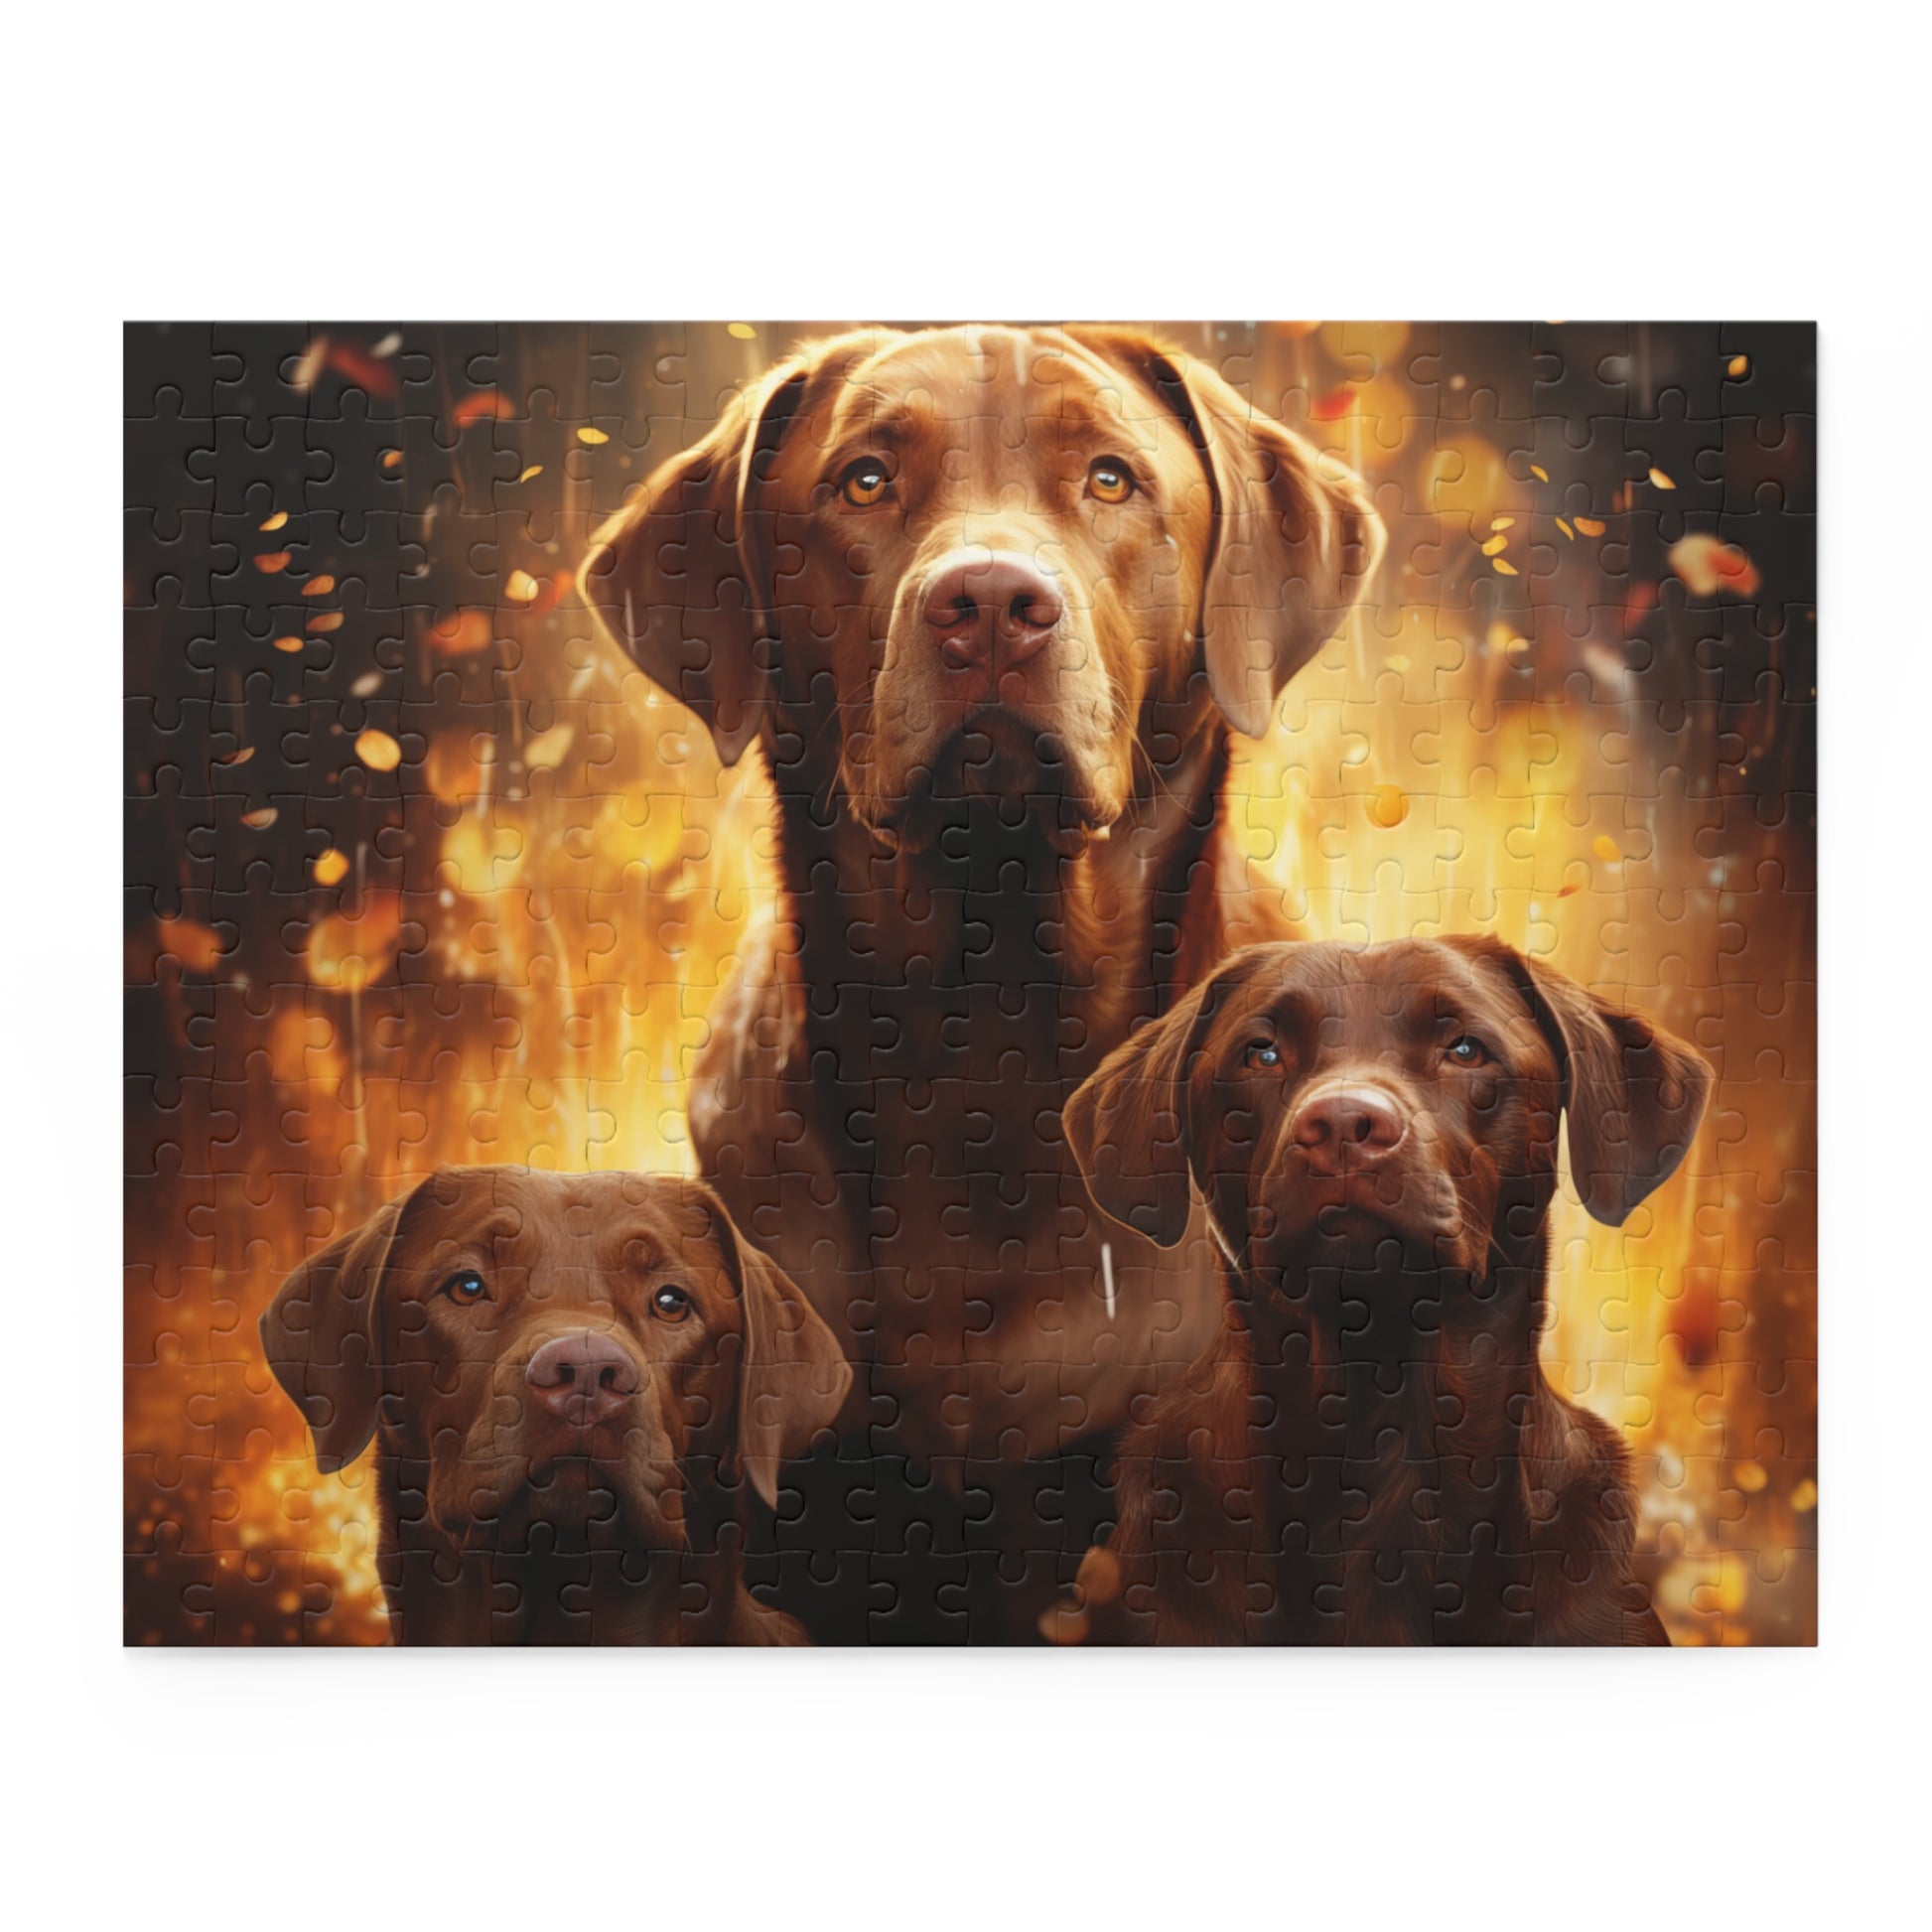 Labrador Vibrant Abstract Watercolor Dog Jigsaw Puzzle for Boys, Girls, Kids Adult Birthday Business Jigsaw Puzzle Gift for Him Funny Humorous Indoor Outdoor Game Gift For Her Online-3